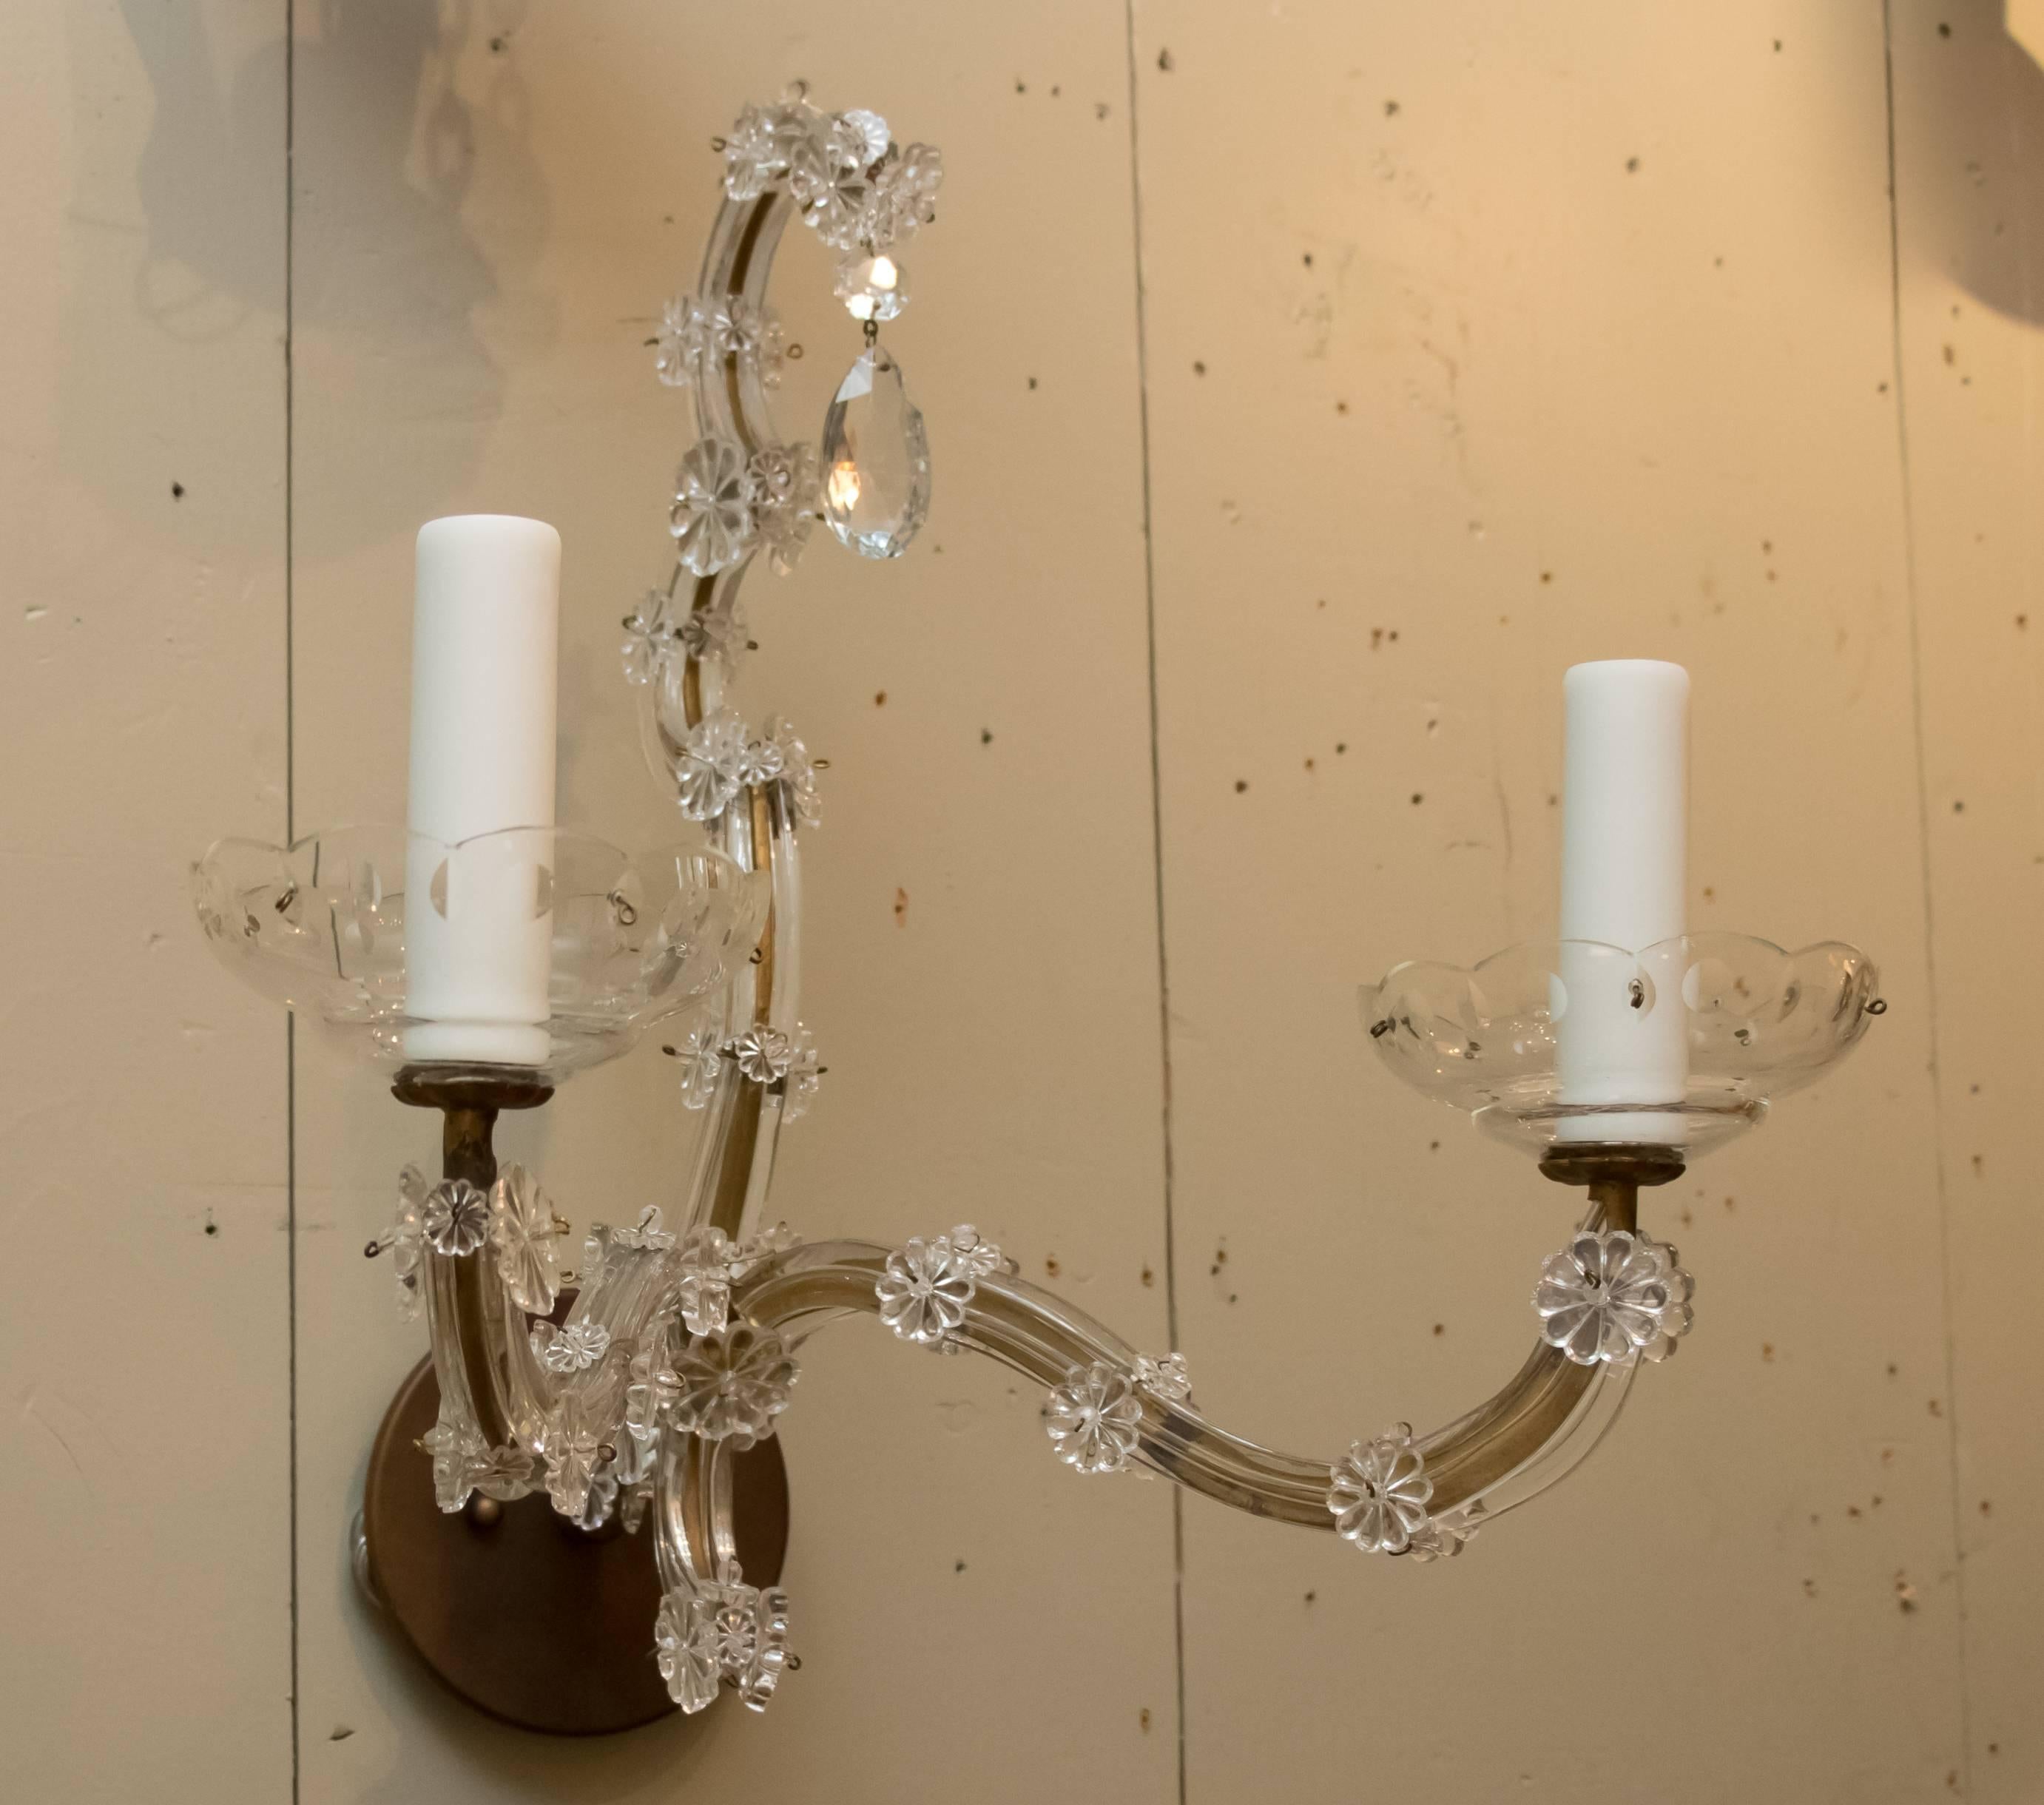 Pair of glass vintage Maria Theresa style sconces from France. Clear flat pieces of glass over an aged brass frame and clear glass rosettes. Pear shaped crystal drop at the top of each sconce with scalloped clear glass bobeche. Newly wired with two